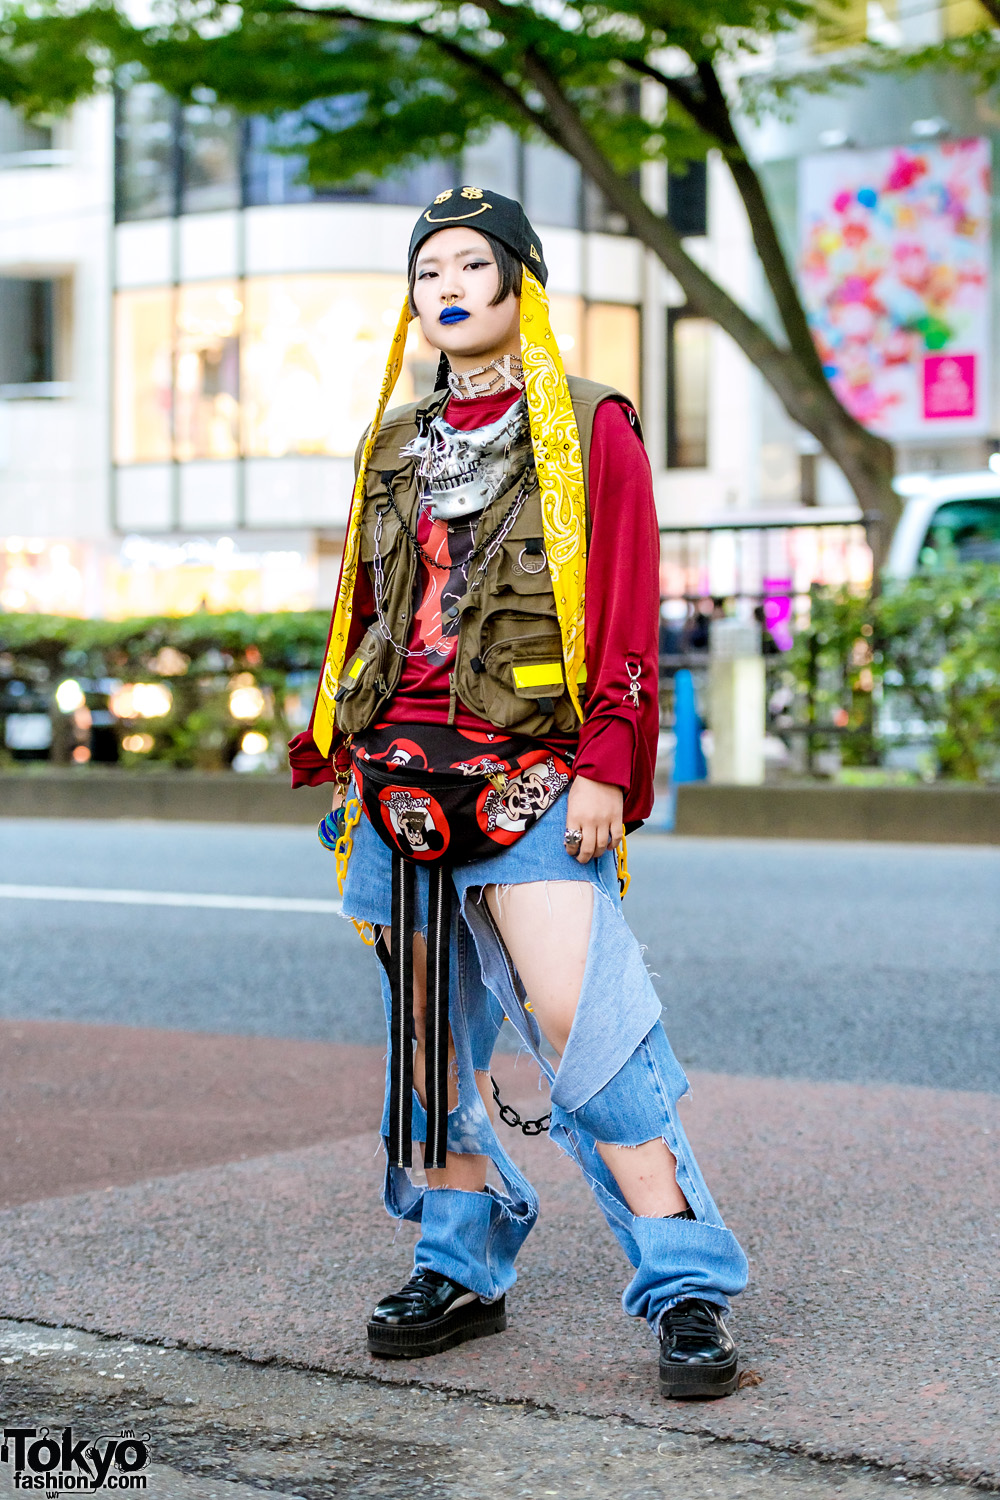 Statement Remake Street Style in Harajuku w/ Growing Pains, Cut Out Jeans, Fenty x Puma Sneakers, Dog Harajuku Skull Necklace & Joyrich Mickey Mouse Club Waist Bag